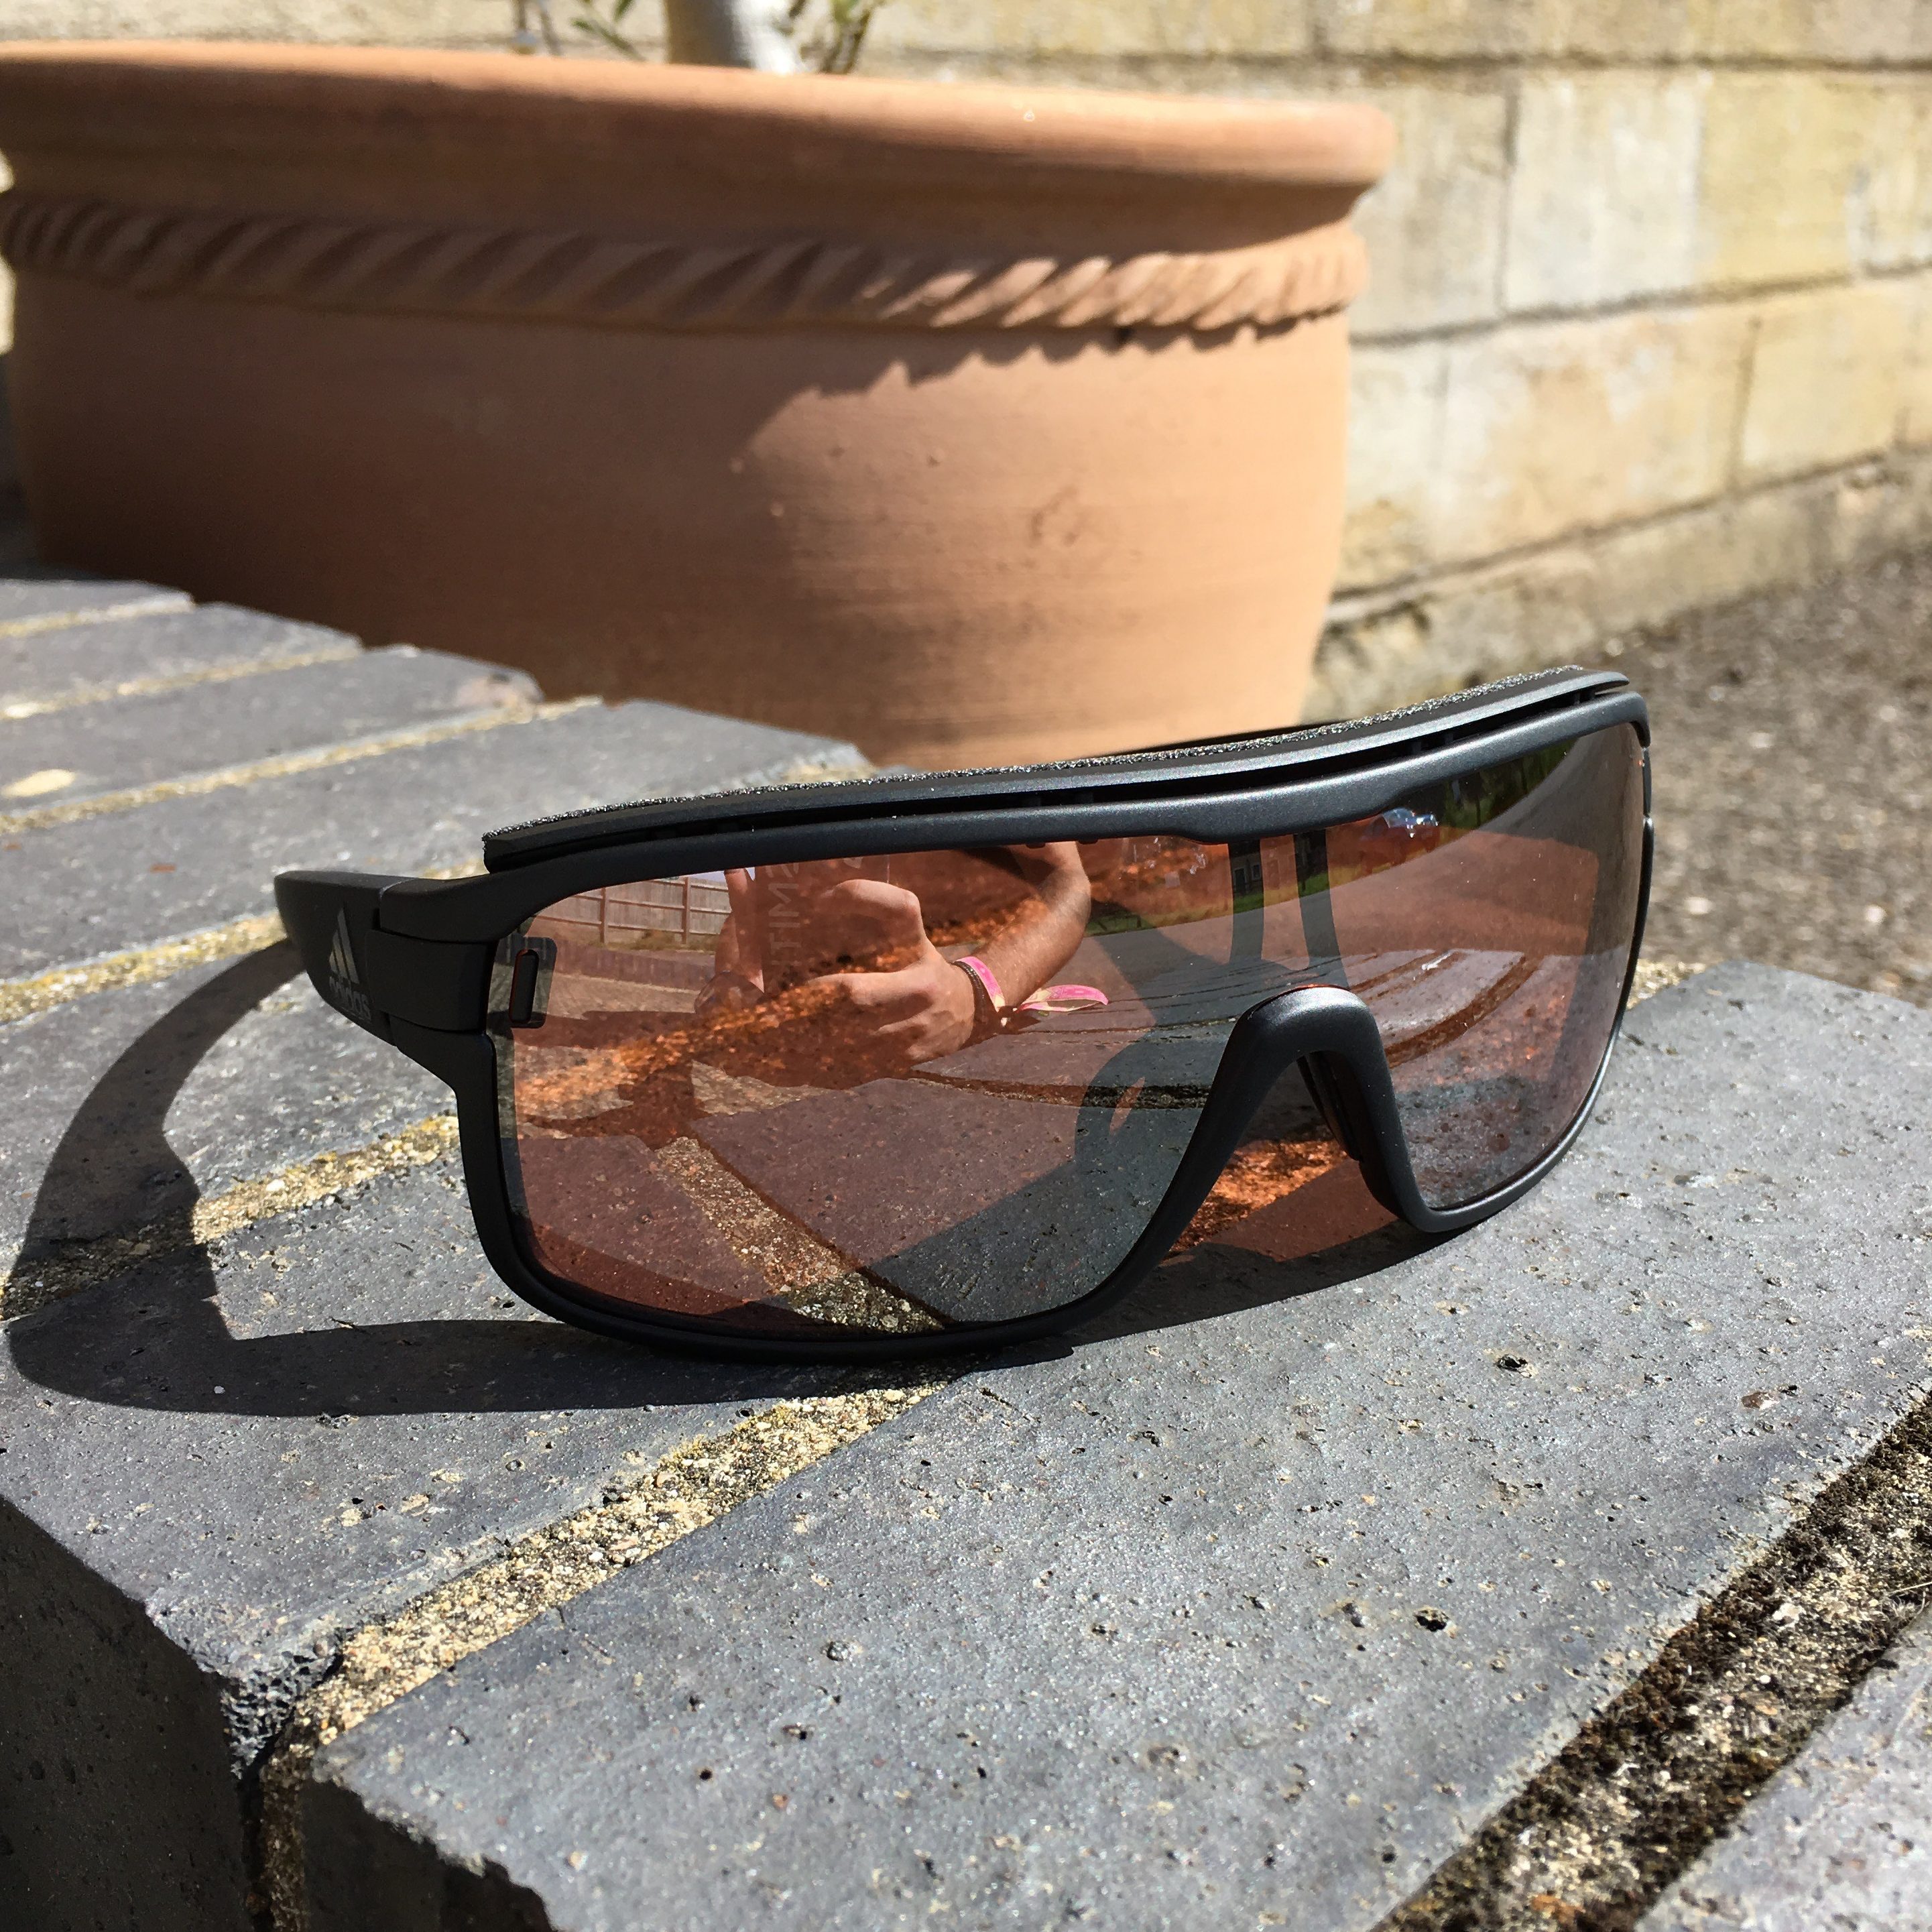 Mount Bank materno no pueden ver adidas LST Active Silver - Lens Review - RxSport - News